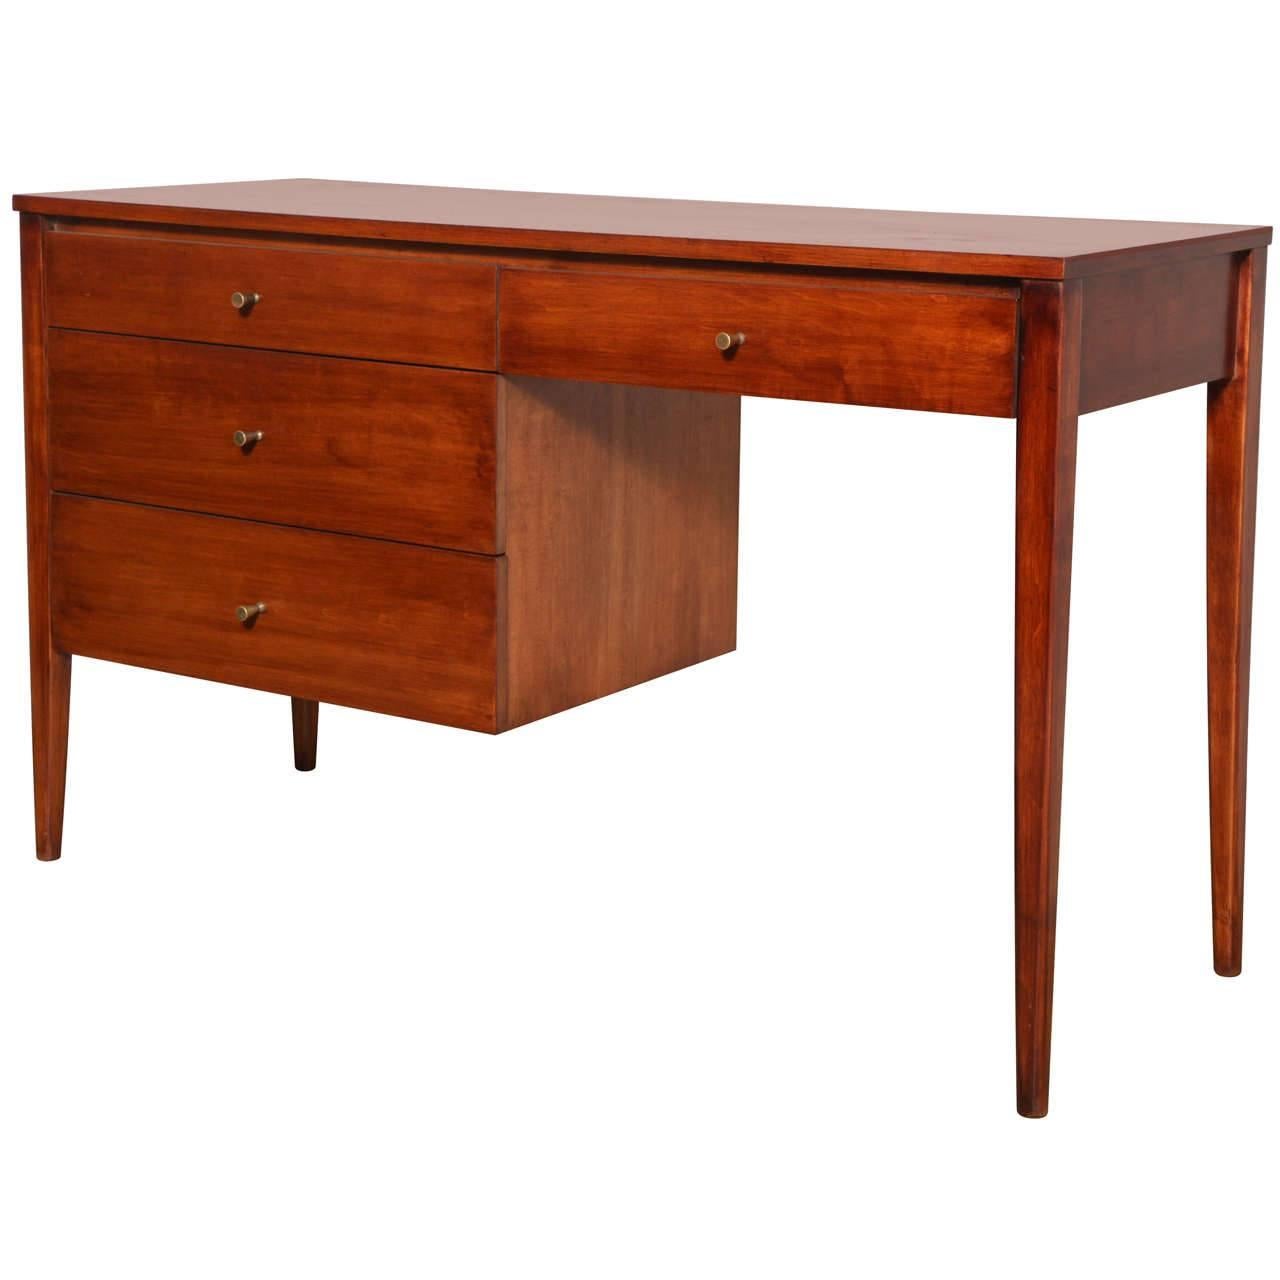 American Mid-Century Modern Paul McCobb Planner Group for Winchendon Desk. Featuring a solid beautifully grained wooden desk with four deep drawers, warm finish, rectangular tapered legs and original Brass hour glass pulls. Newly refinished.